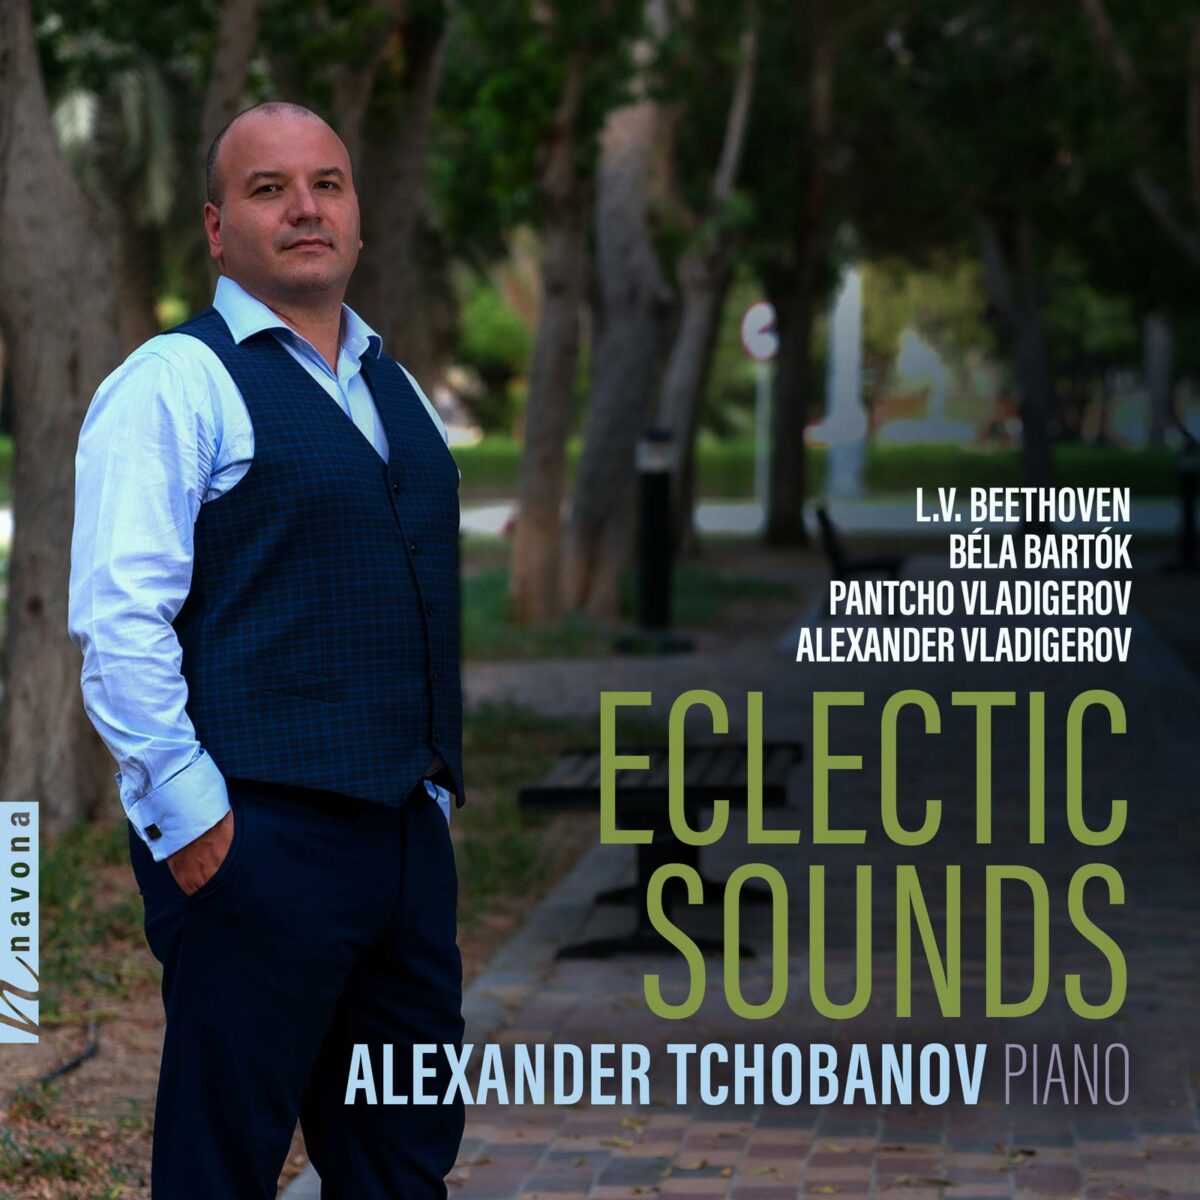 ECLECTIC SOUNDS - album cover